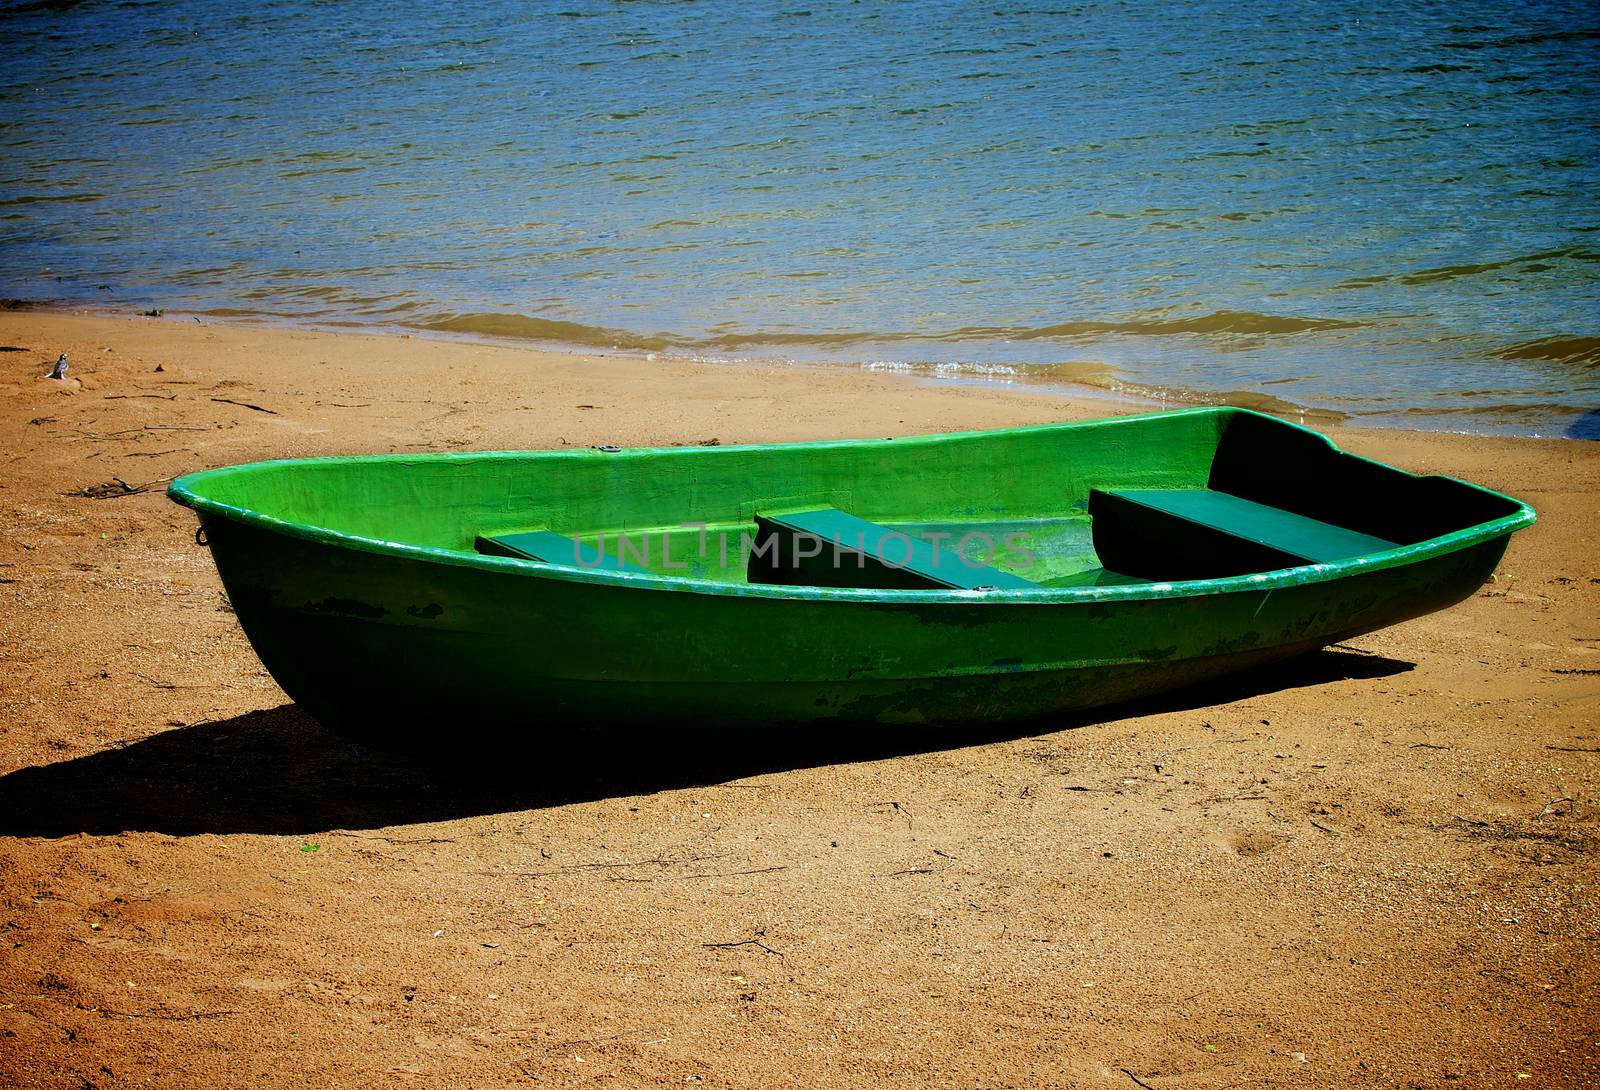 Old Lonely Green Boat on Sand River Shore Outdoors